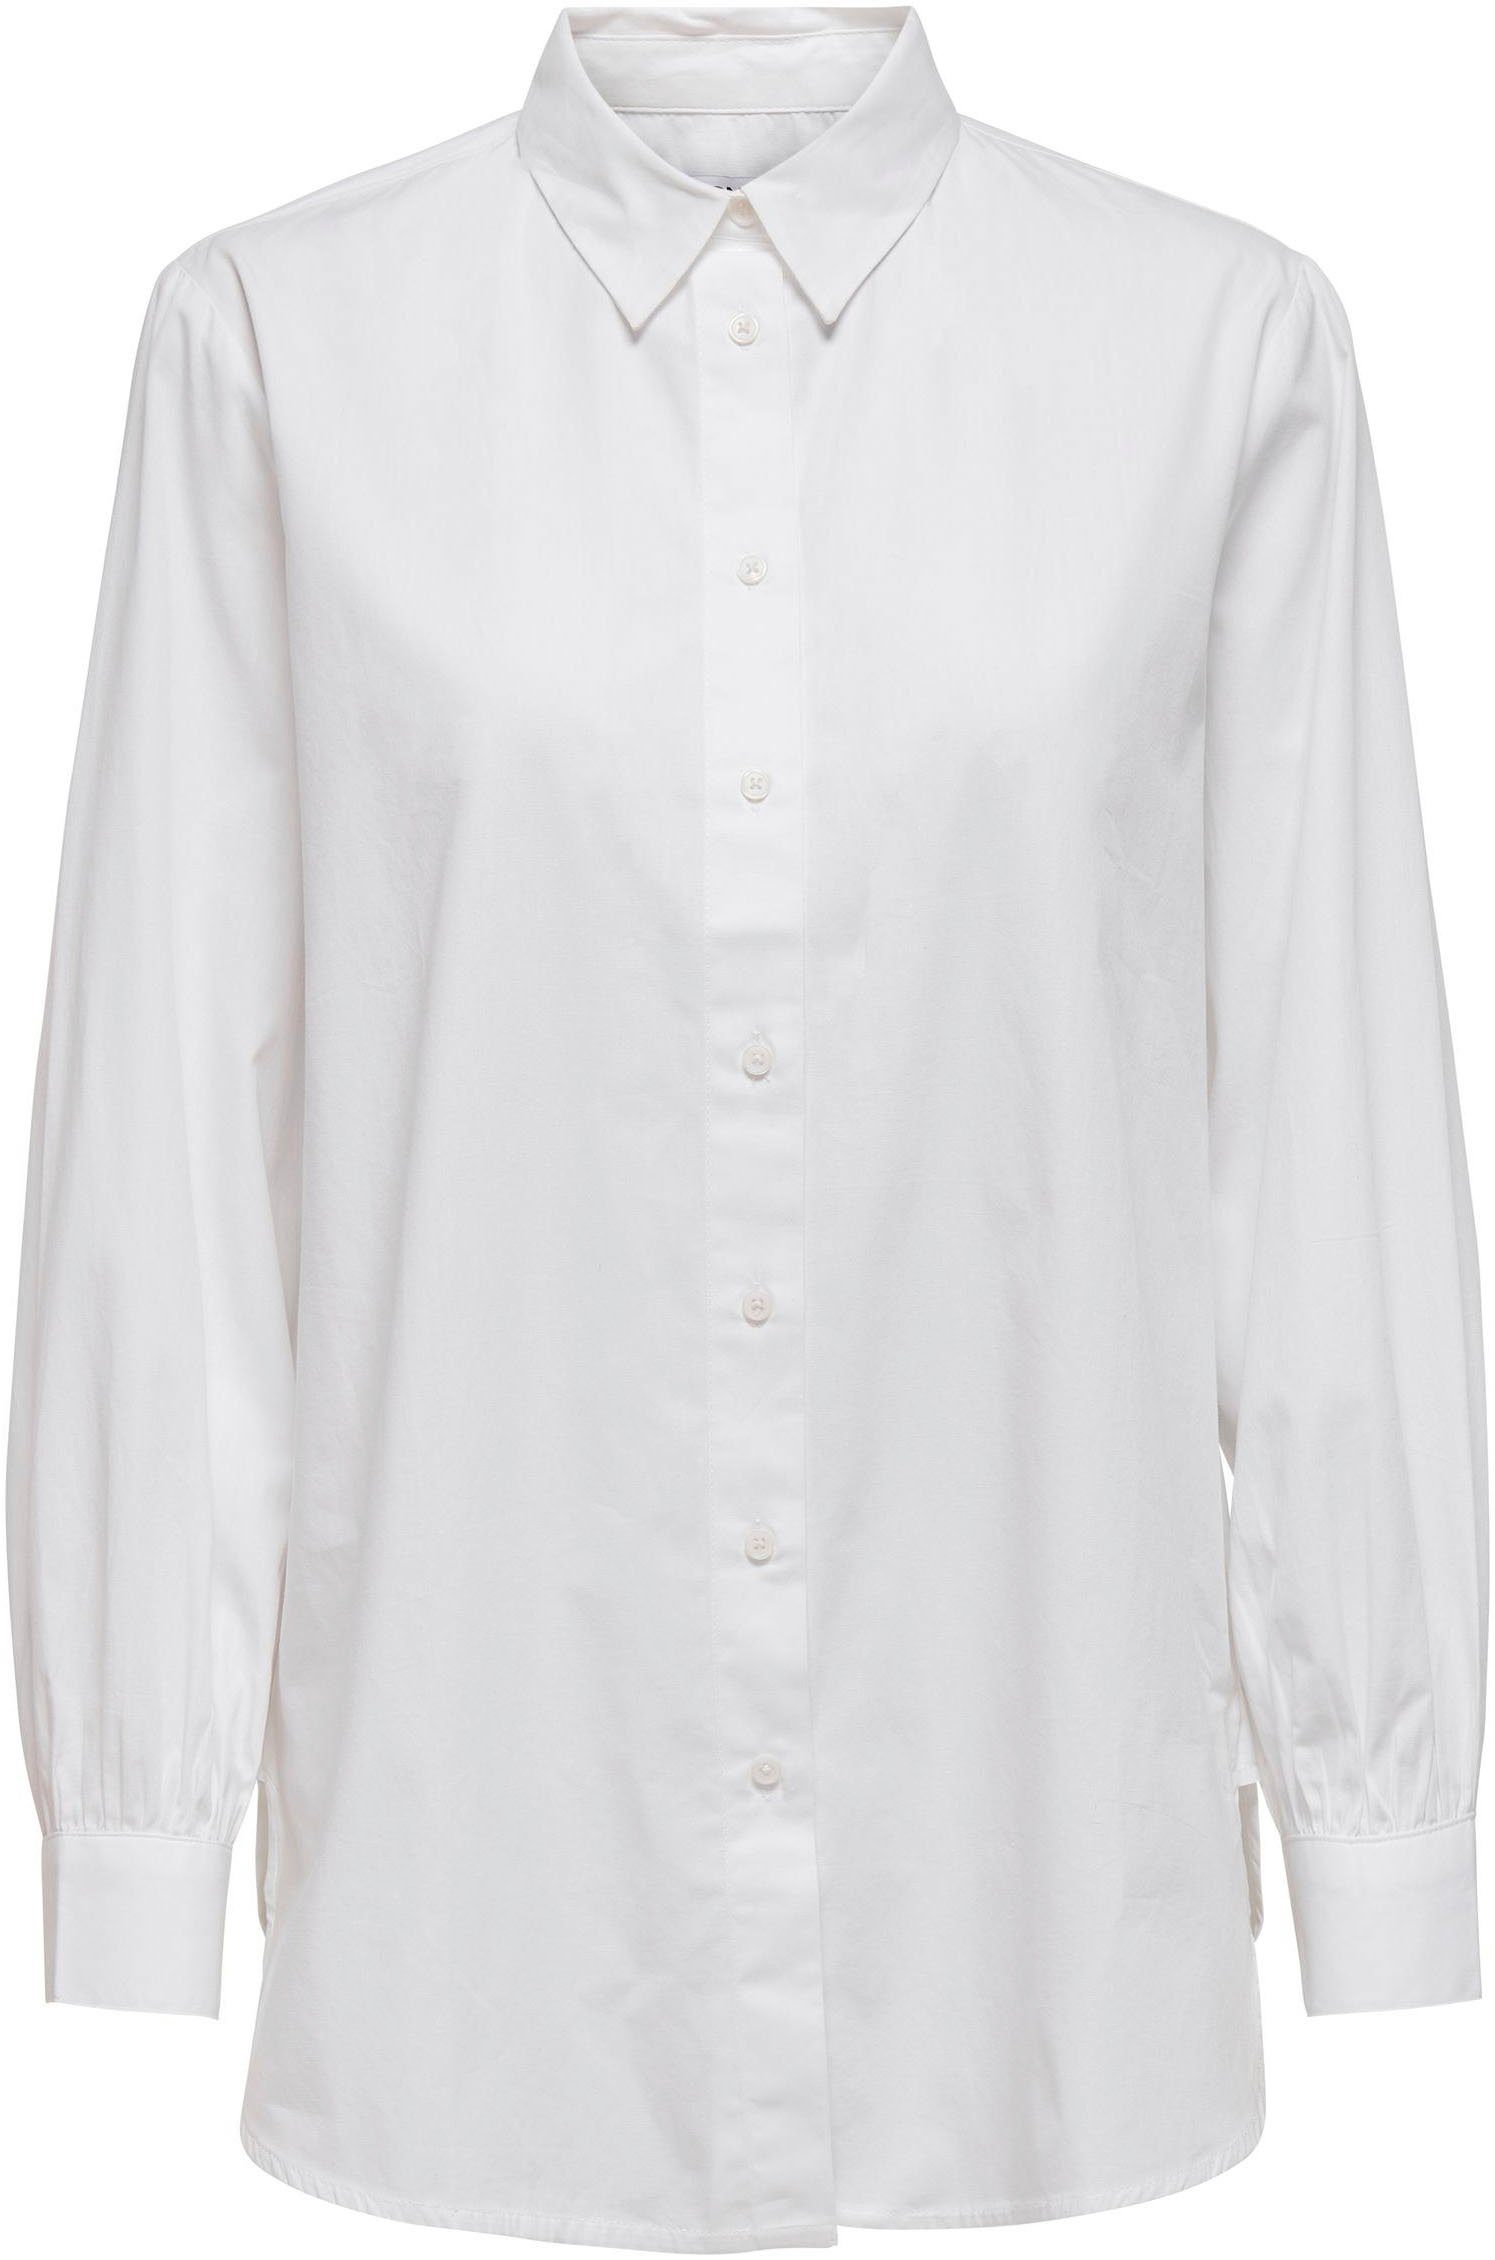 ONLY Longbluse ONLNORA WVN L/S NEW White SHIRT